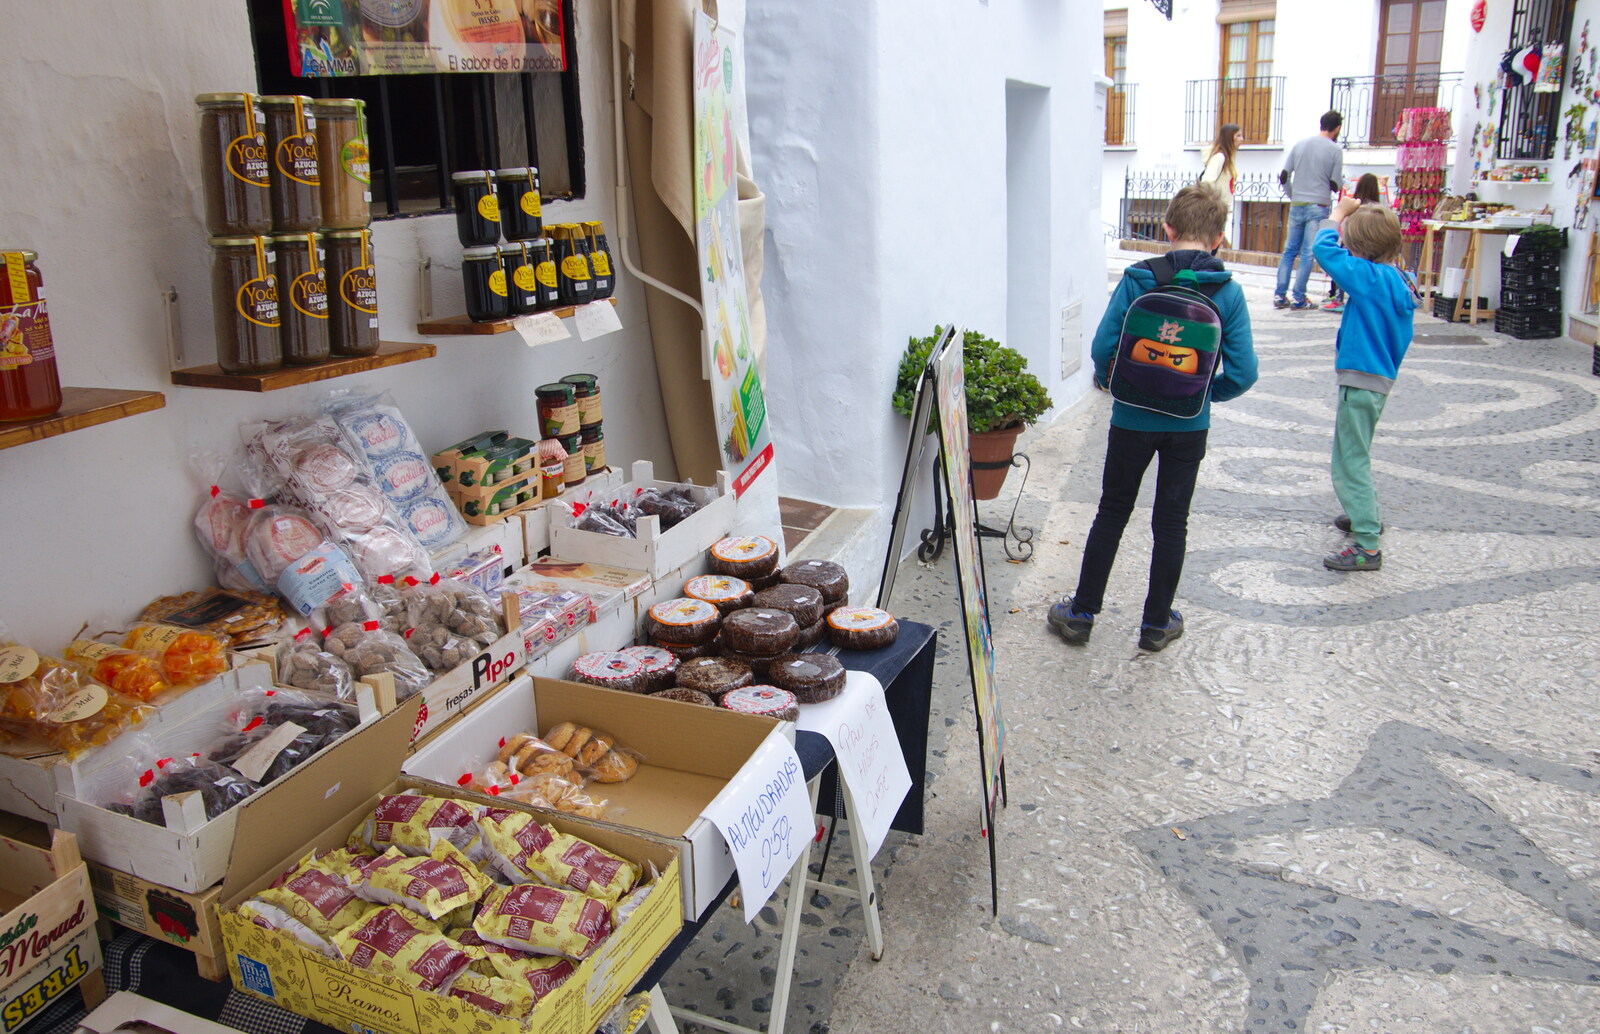 We stop for some cheese and pastries from The Caves of Nerja, and Frigiliana, Andalusia, Spain - 18th April 2019